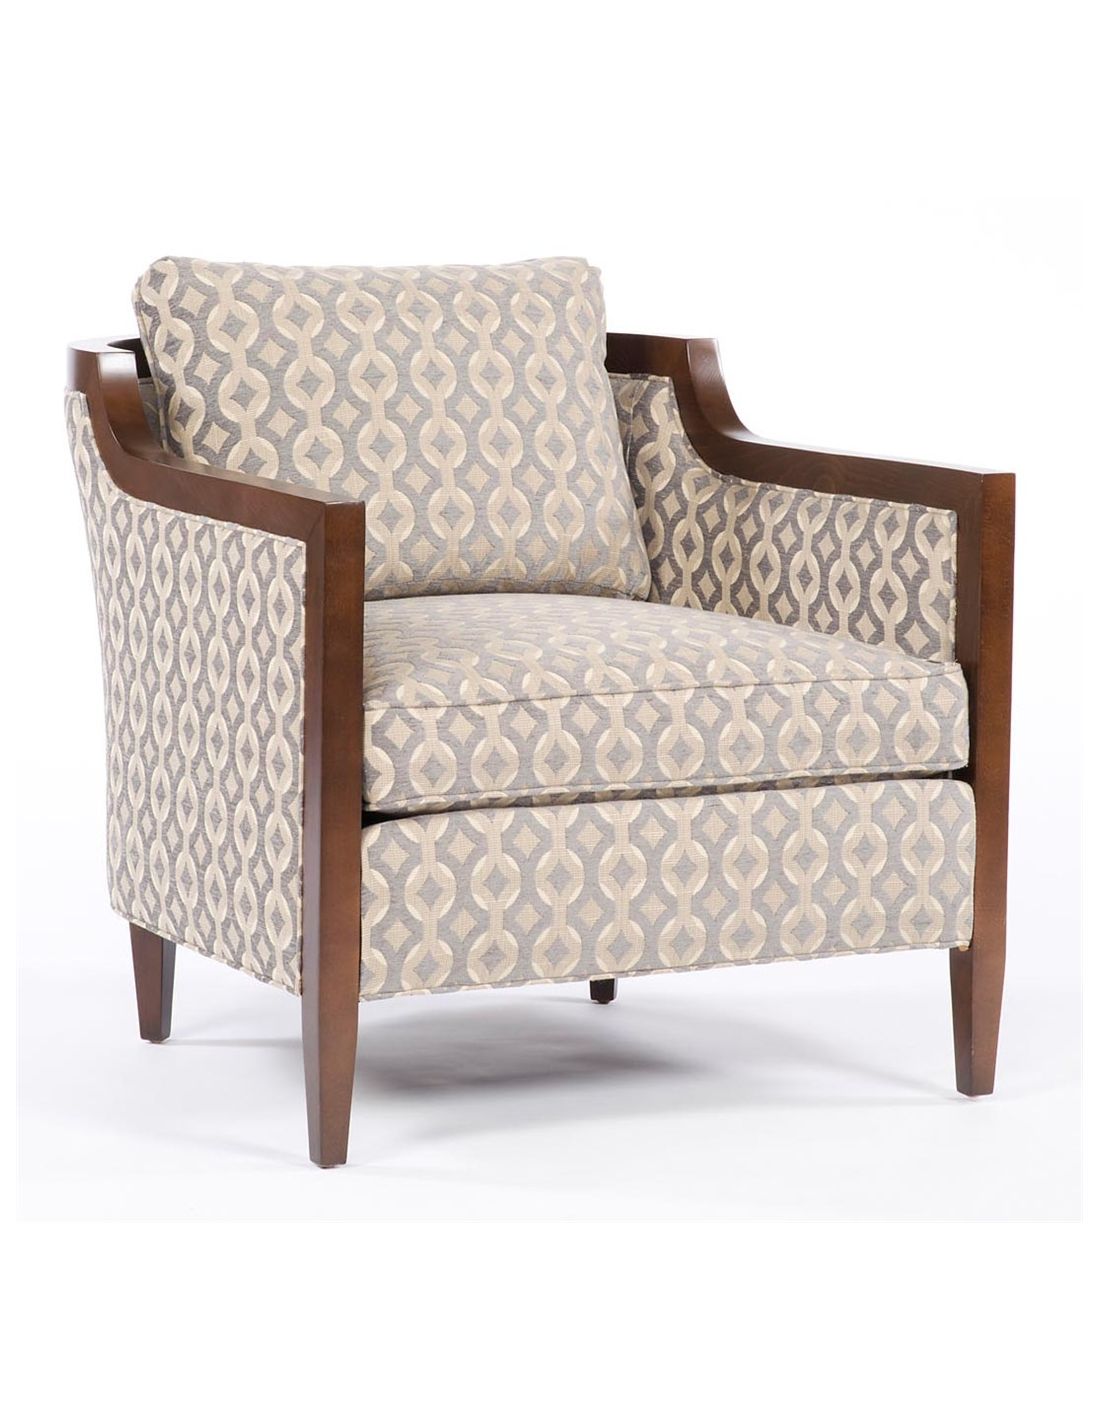 Contemporary styled living room chair. 83